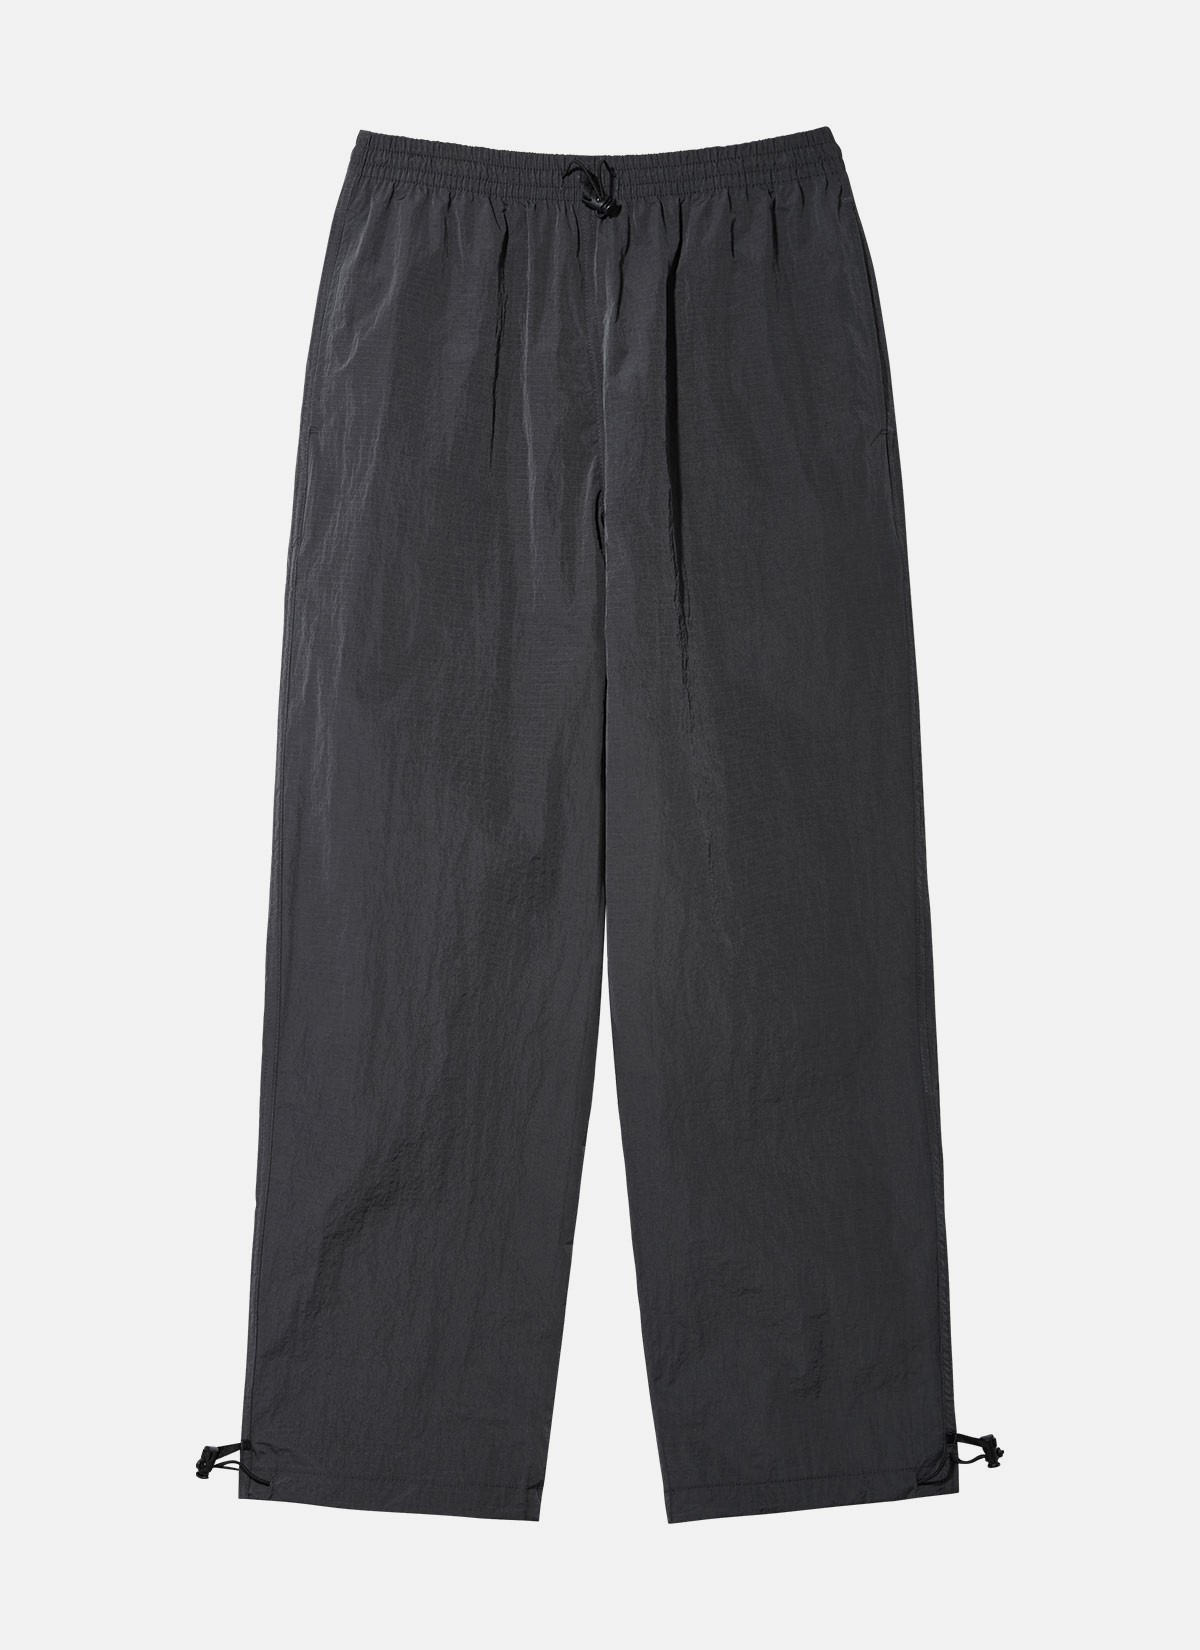 Rocky Pants Ripstop Charcoal